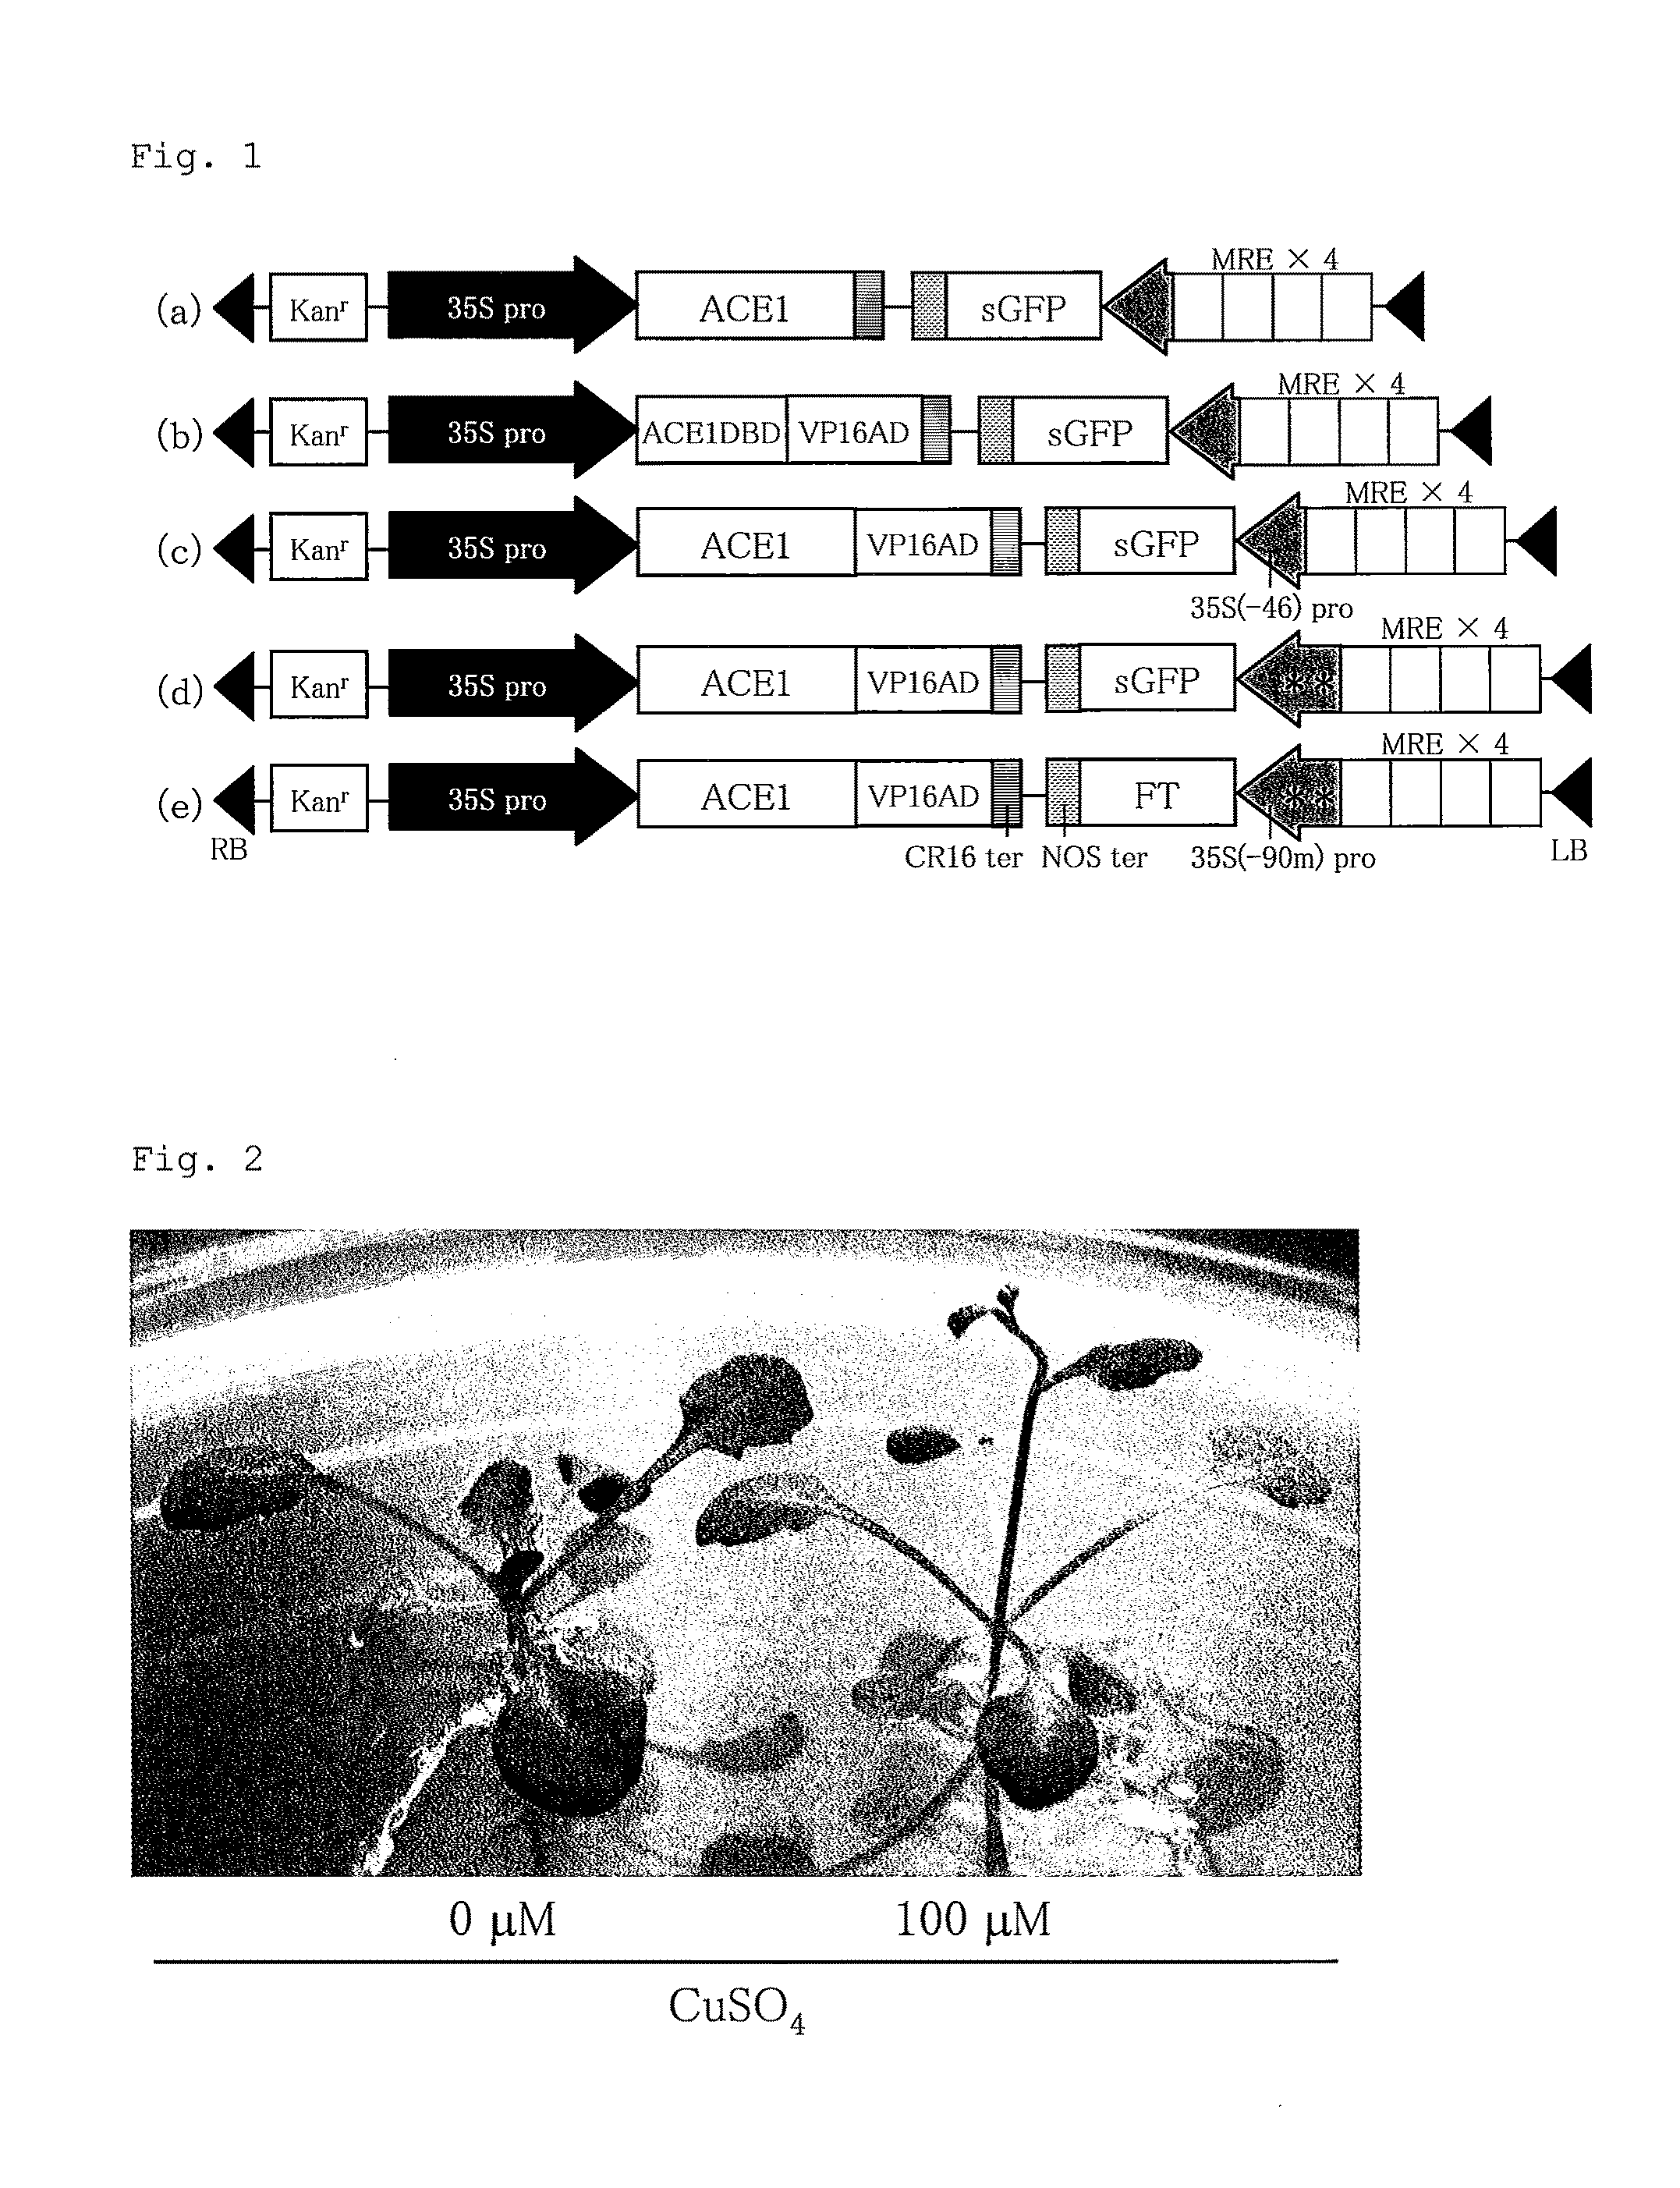 Method for controlling flowering time of plant